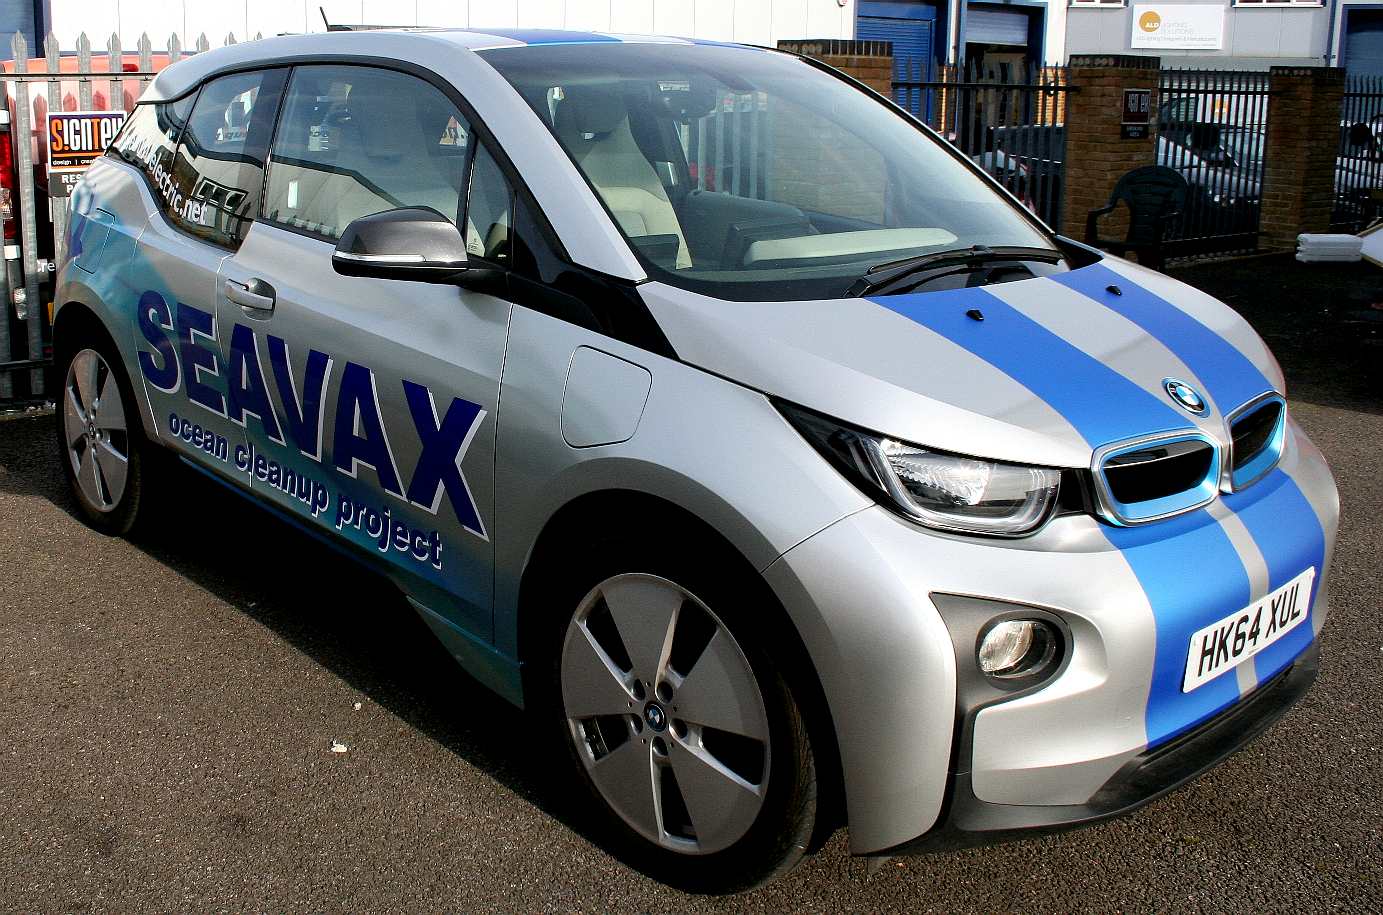 BMW i3 with range extender, could be converted to run on methanol